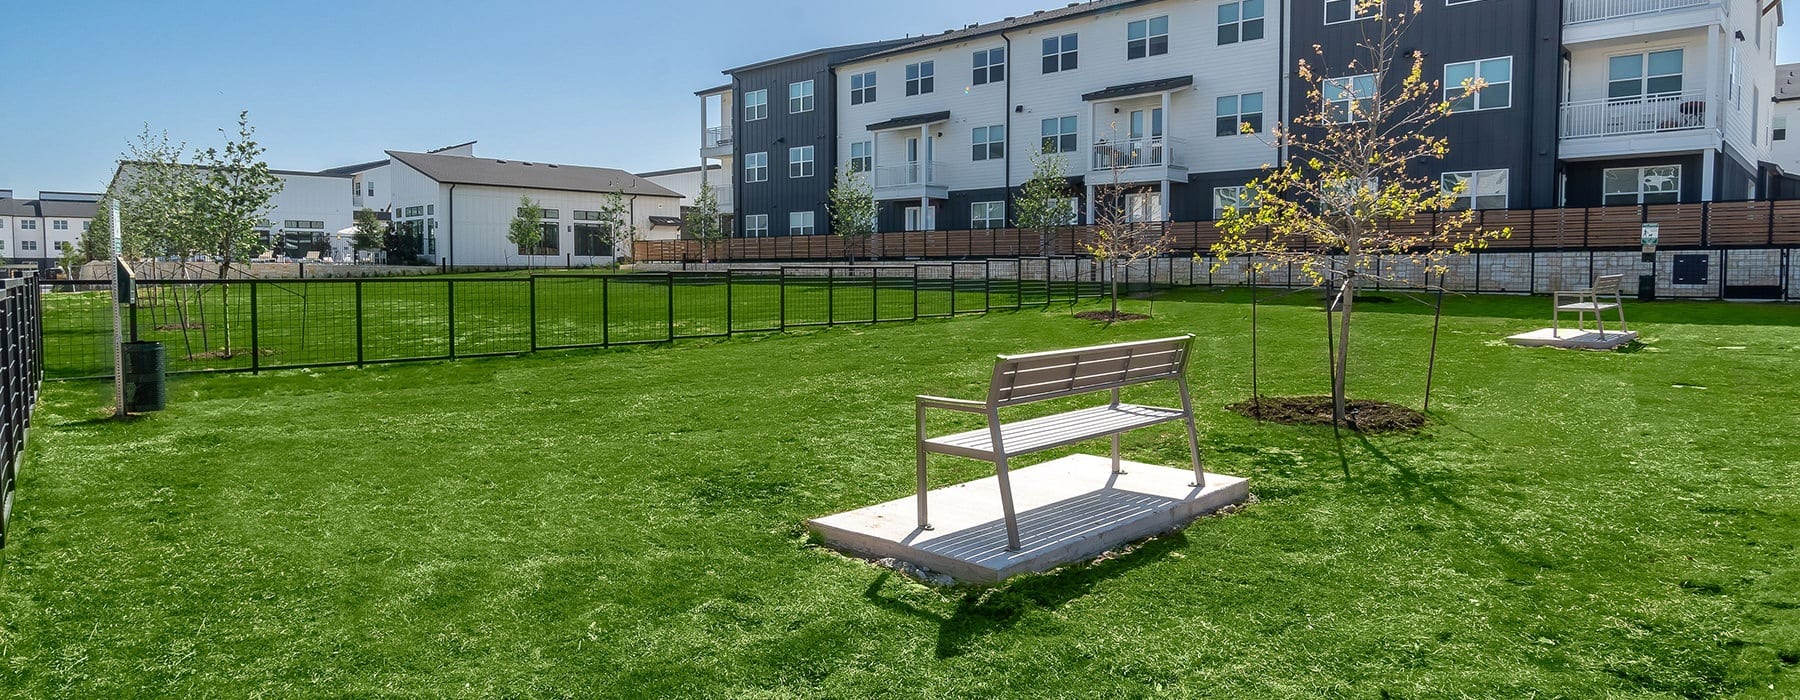 Large open green space with fenced dog park